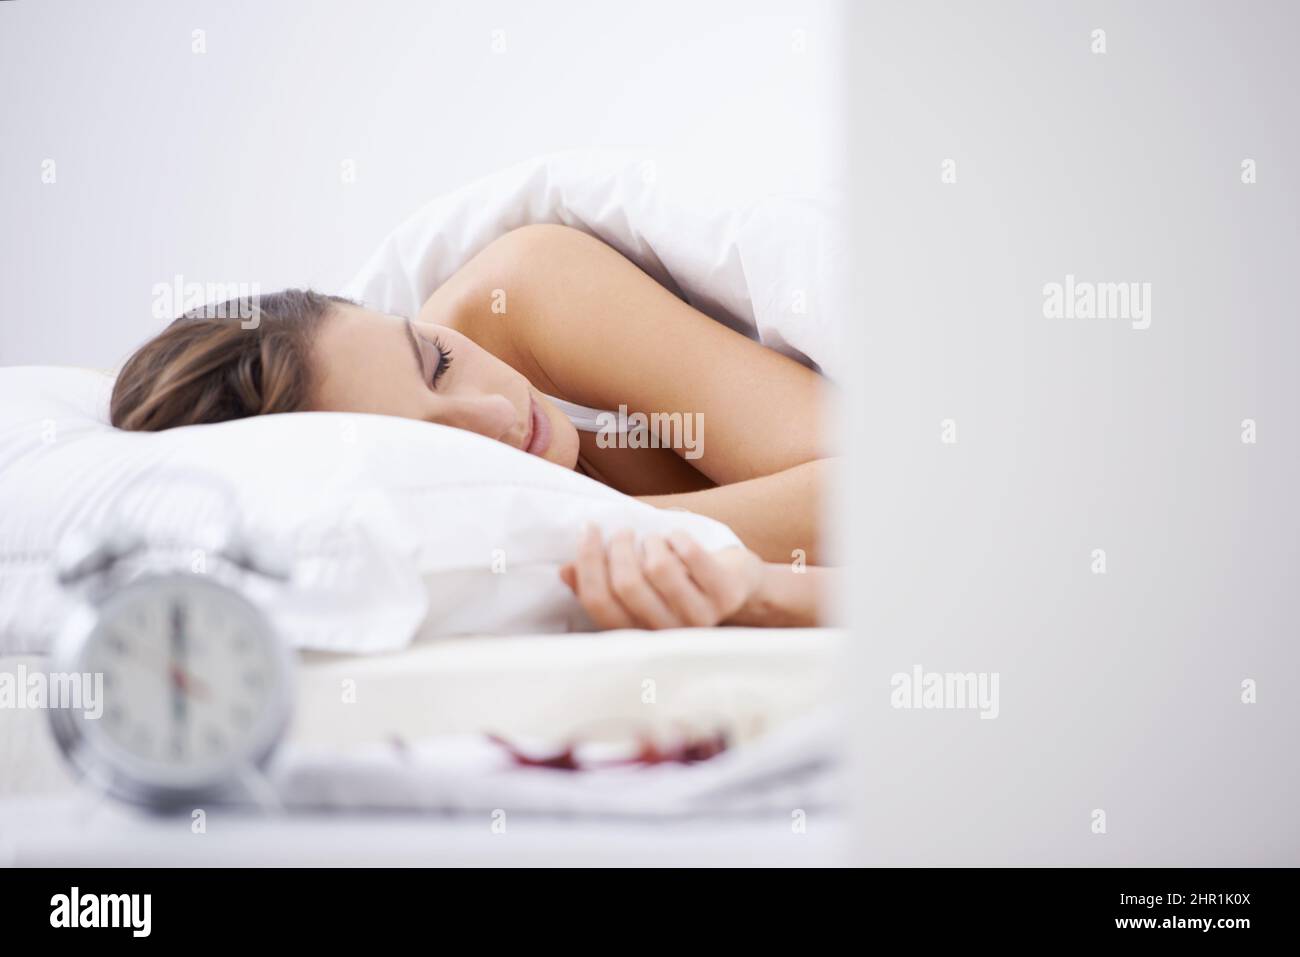 Getting her 8 hours. A woman sleeping in her bed with an alarm clock in the foreground. Stock Photo